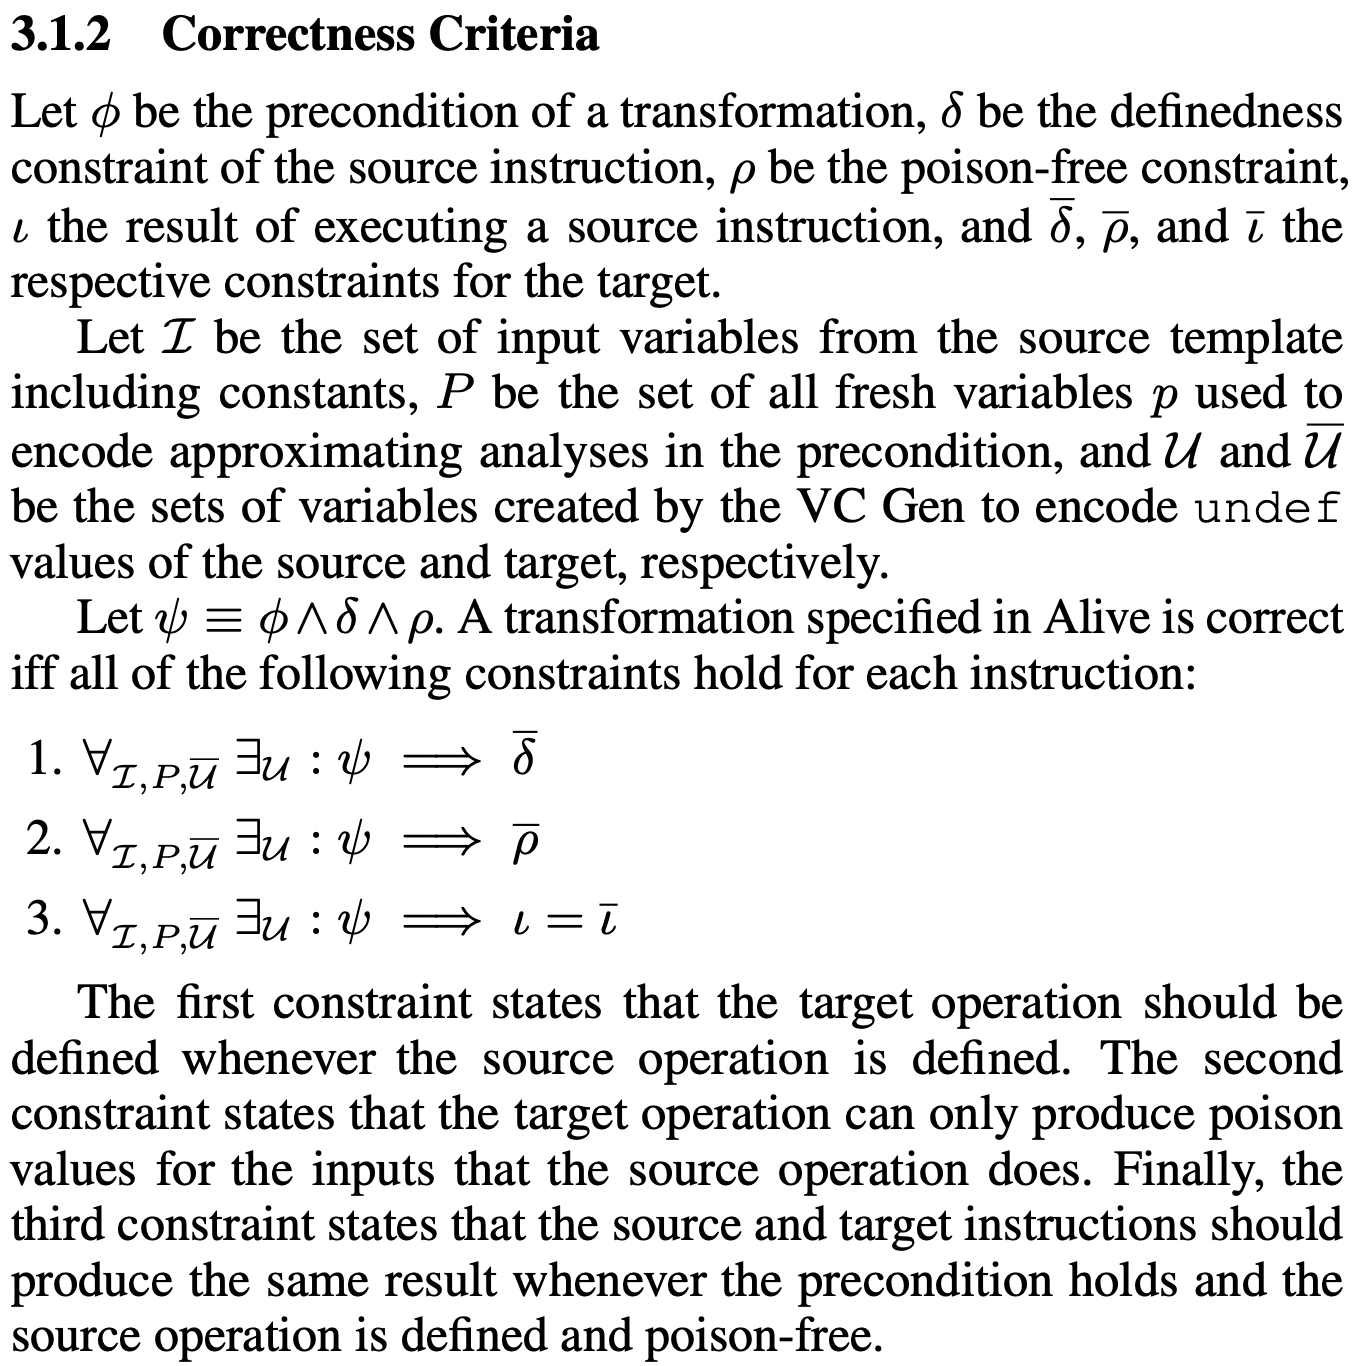 A snippet from the paper of section 3.1.2, which describes the SMT encoding of the correctness criteria. In particular, the first condition encodes the constraint that the target operation is defined whenever the source operation is defined. The second constraint is that the target operation is poison-free whenever the source operation is poison-free. And the third constraint is that the source and target instructions produce the same result as long as the precondition holds and the operation is defined and poison-free.